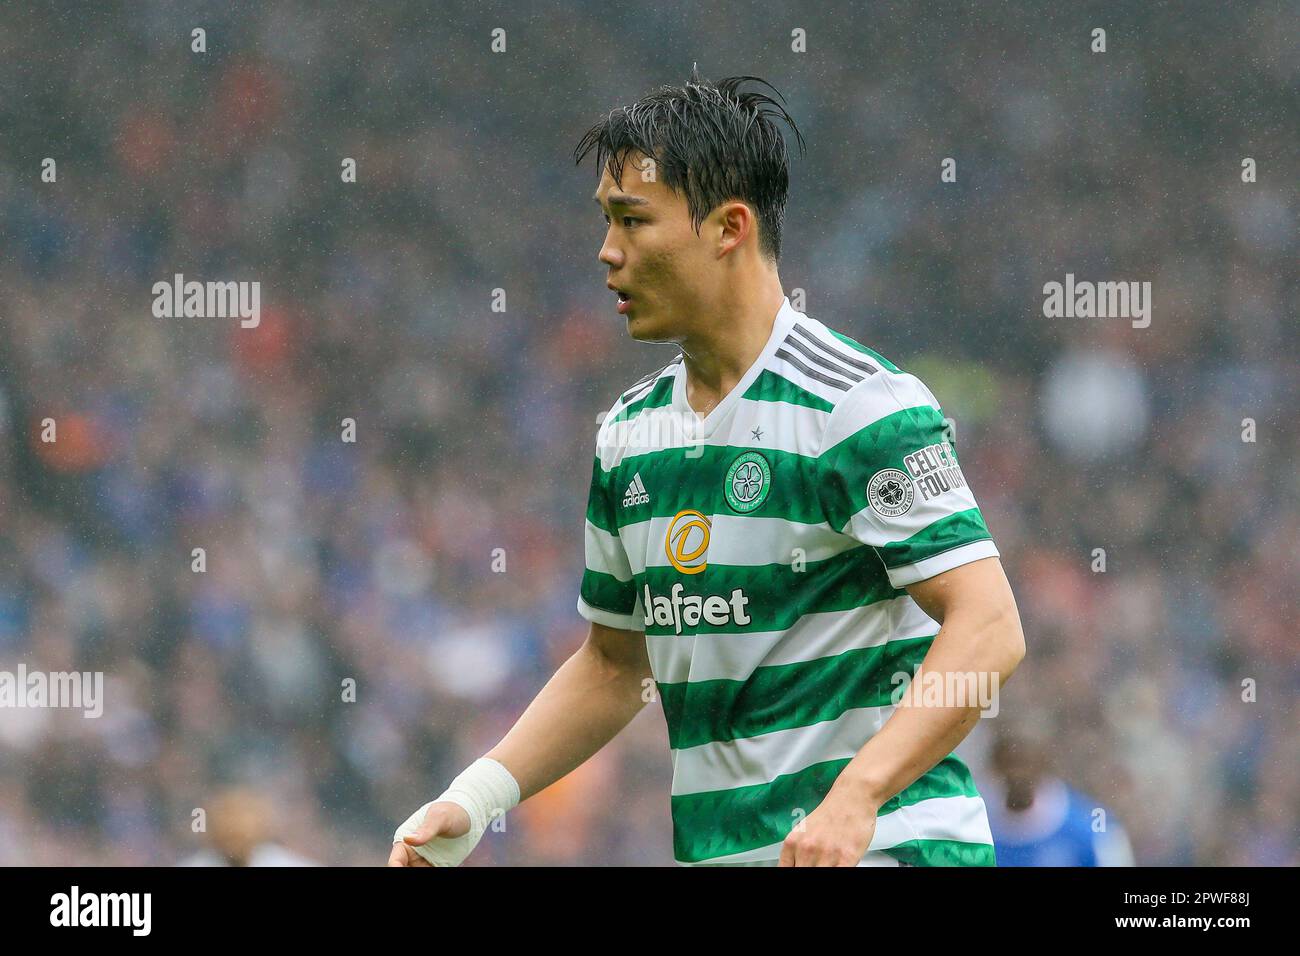 Glasgow, UK. 30th Apr, 2023. The second scottish cup semi-final took place at Hampden Park, Glasgow, Scotland, UK between Rangers and Celtic. Celtic won, 0 - 1, with the goal scored by Jota, (Neves Filipe) Celtic number 17, in 42 minutes. Celtic now go on to the final to play against Inverness Caledonian Thistle. Credit: Findlay/Alamy Live News Stock Photo